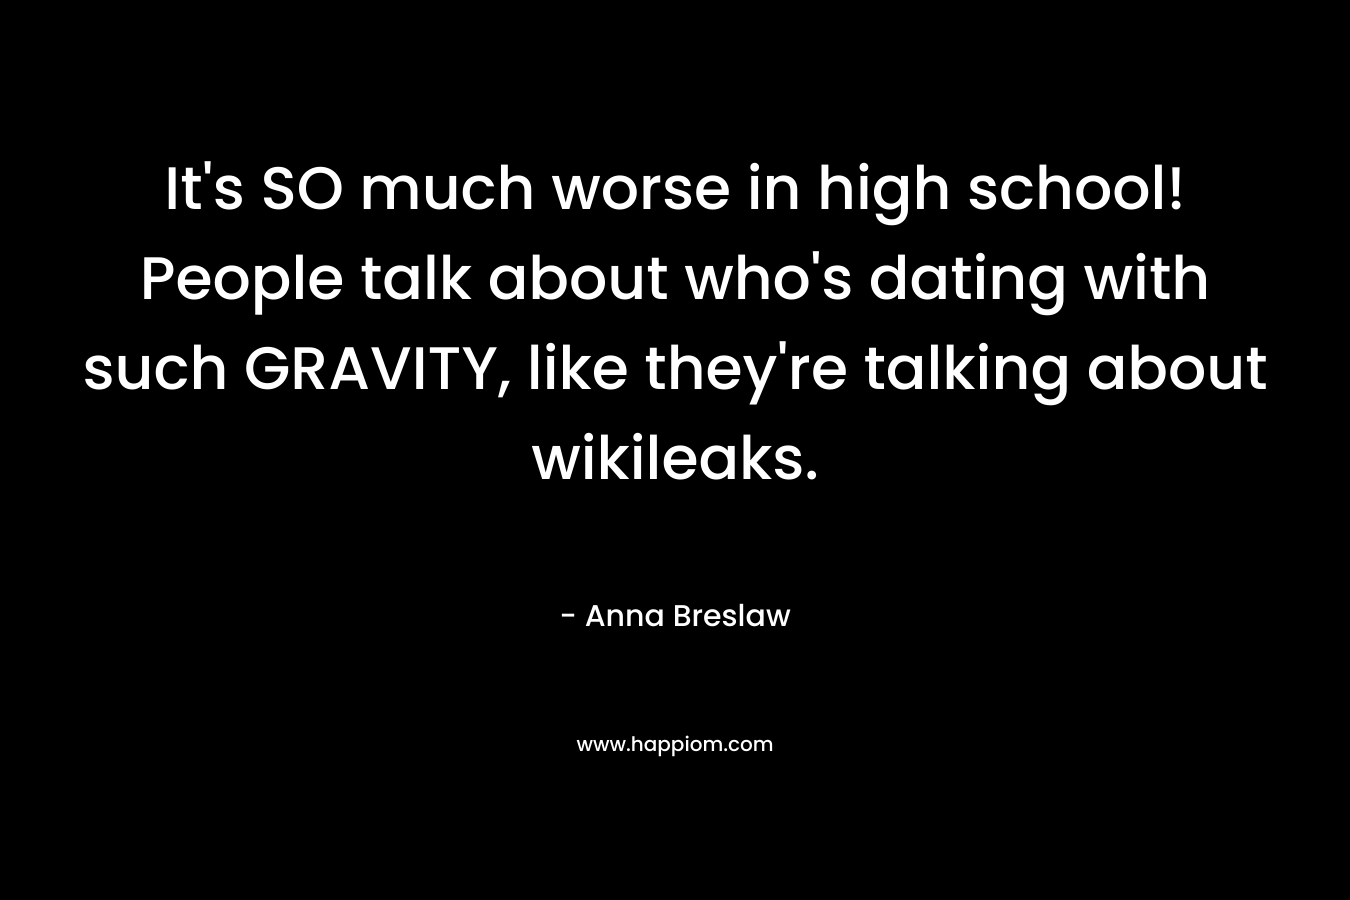 It's SO much worse in high school! People talk about who's dating with such GRAVITY, like they're talking about wikileaks.